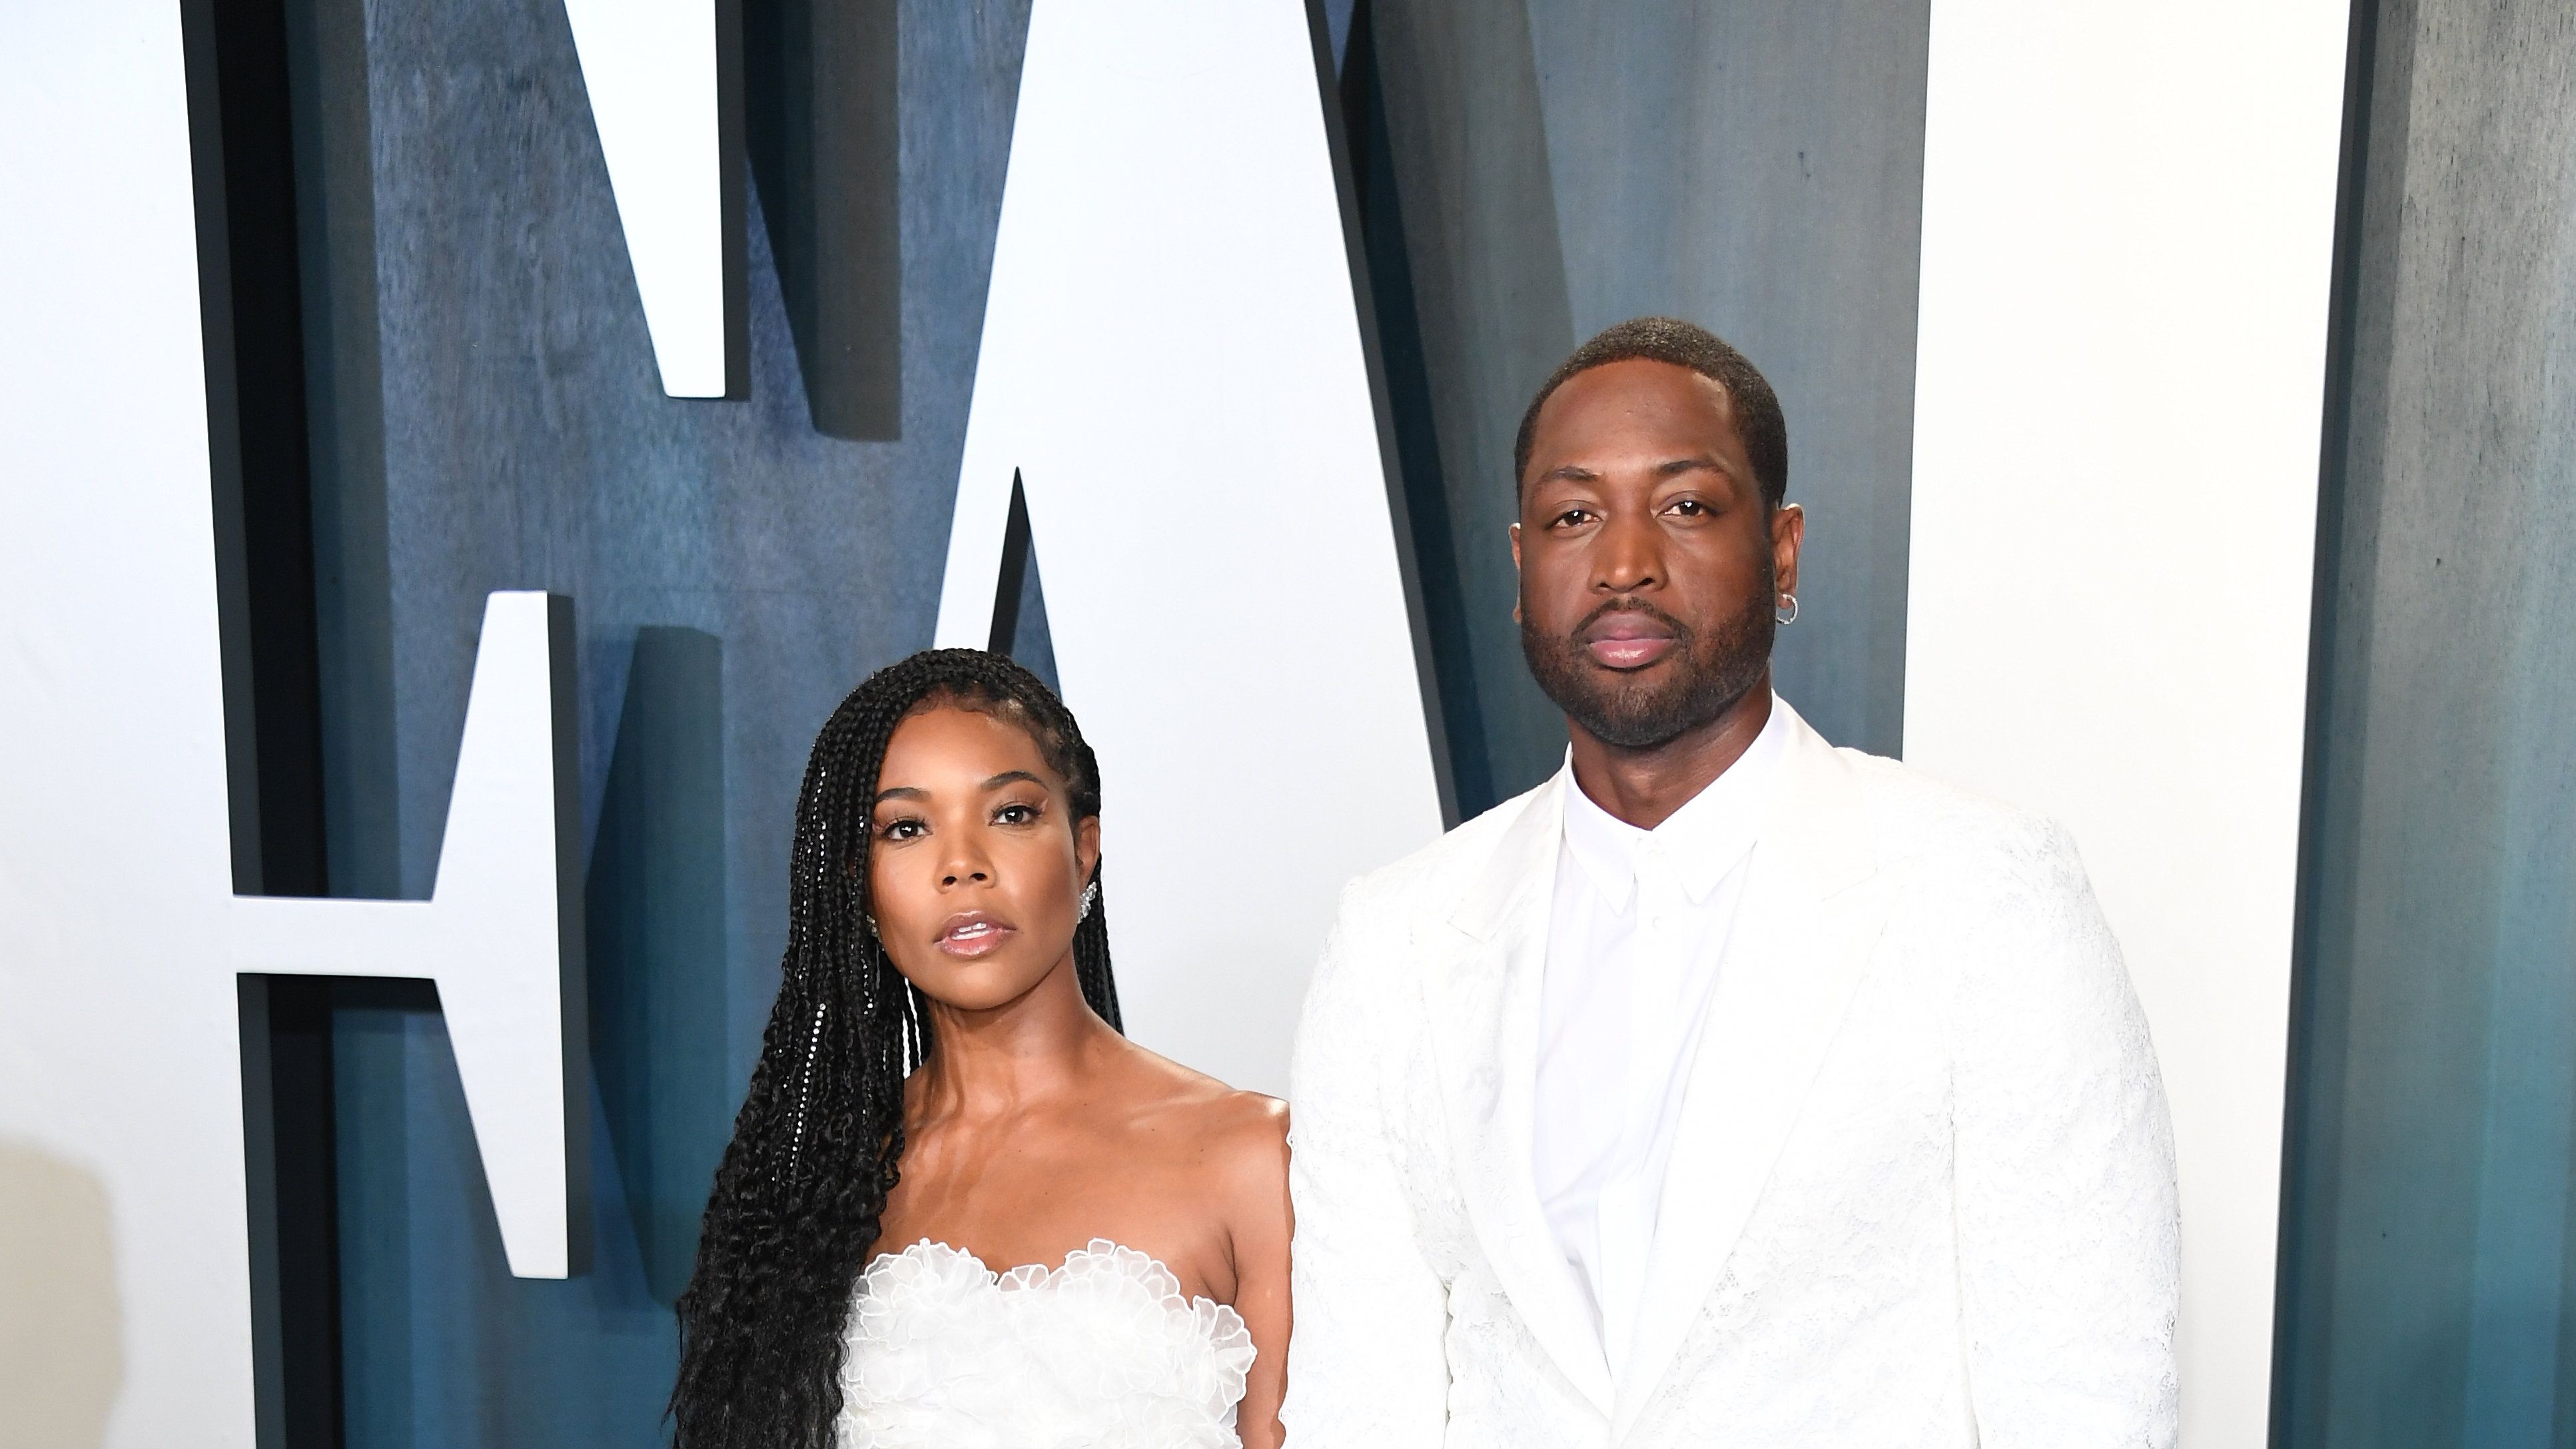 Dwyane Wade tried to end things with Gabrielle Union before